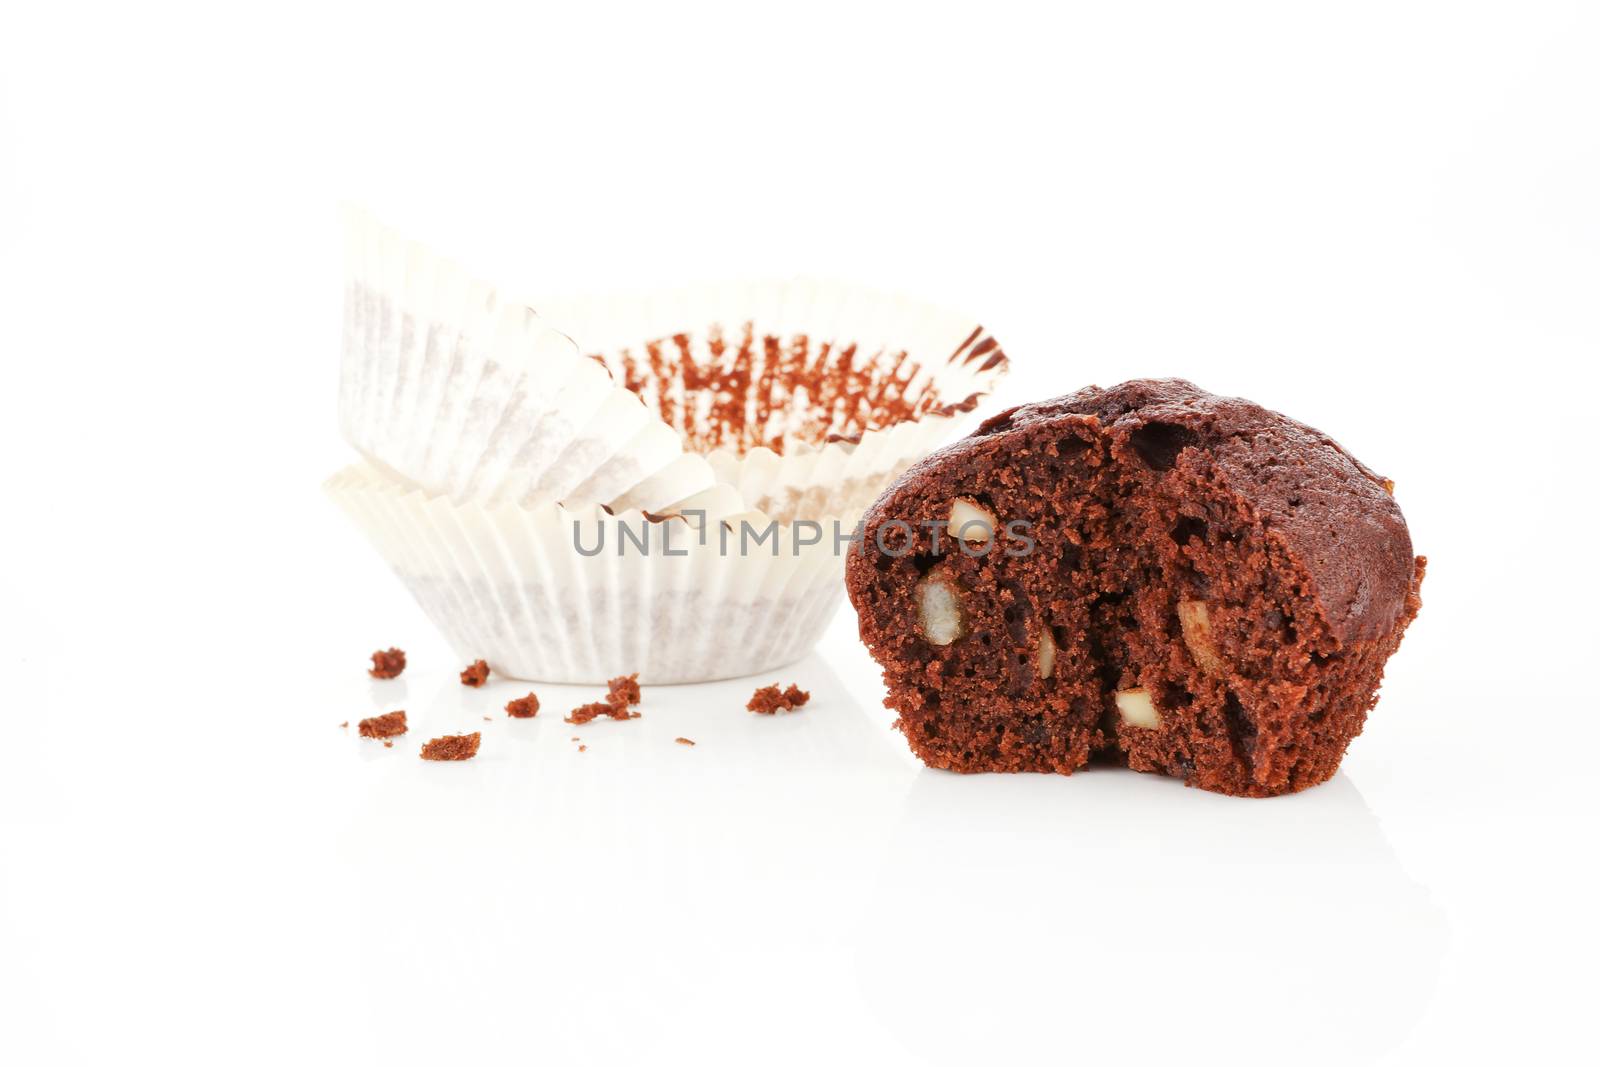  Chocolate muffin cross section isolated on white. Paper and crumbs in background.